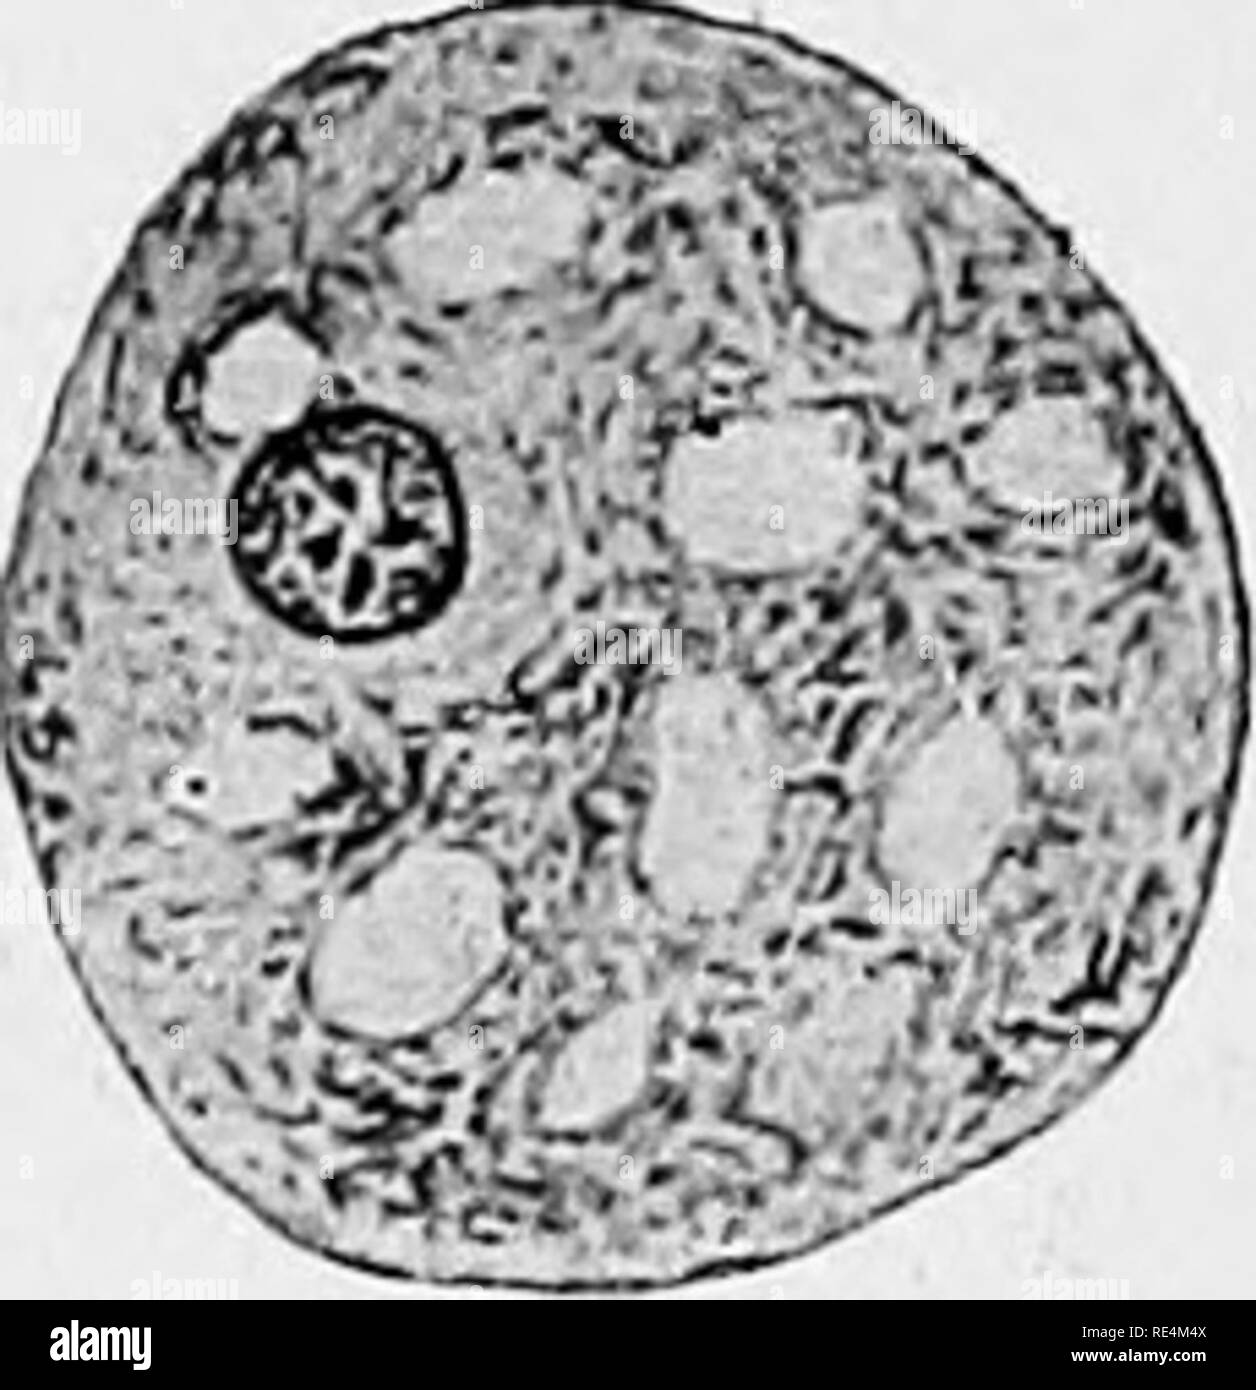 . Manual of bacteriology. Bacteriology. composed ectoplasm 169, a, b). a m oe b i c ments slow of the (Fig. By the move- loco- and a few vacuoles. c, an amceba as seen in a fixed film preparation rounded nucleus (Kruse and Pasquale). x 600. motion may be produced. The amoebae often show o vacuoles in their substance, and may Fig. 169.— Amogbae of dysentery. contain numerous a and /', amoeba; as seen in the fresh stools, showing blunt amce- boid processes of ectoplasm. The endoplasm of ^ shows a nucleus, three red COTpUSClCS red corpuscles, and numerous vacuoles; that of ^, numerous red corpusc Stock Photo